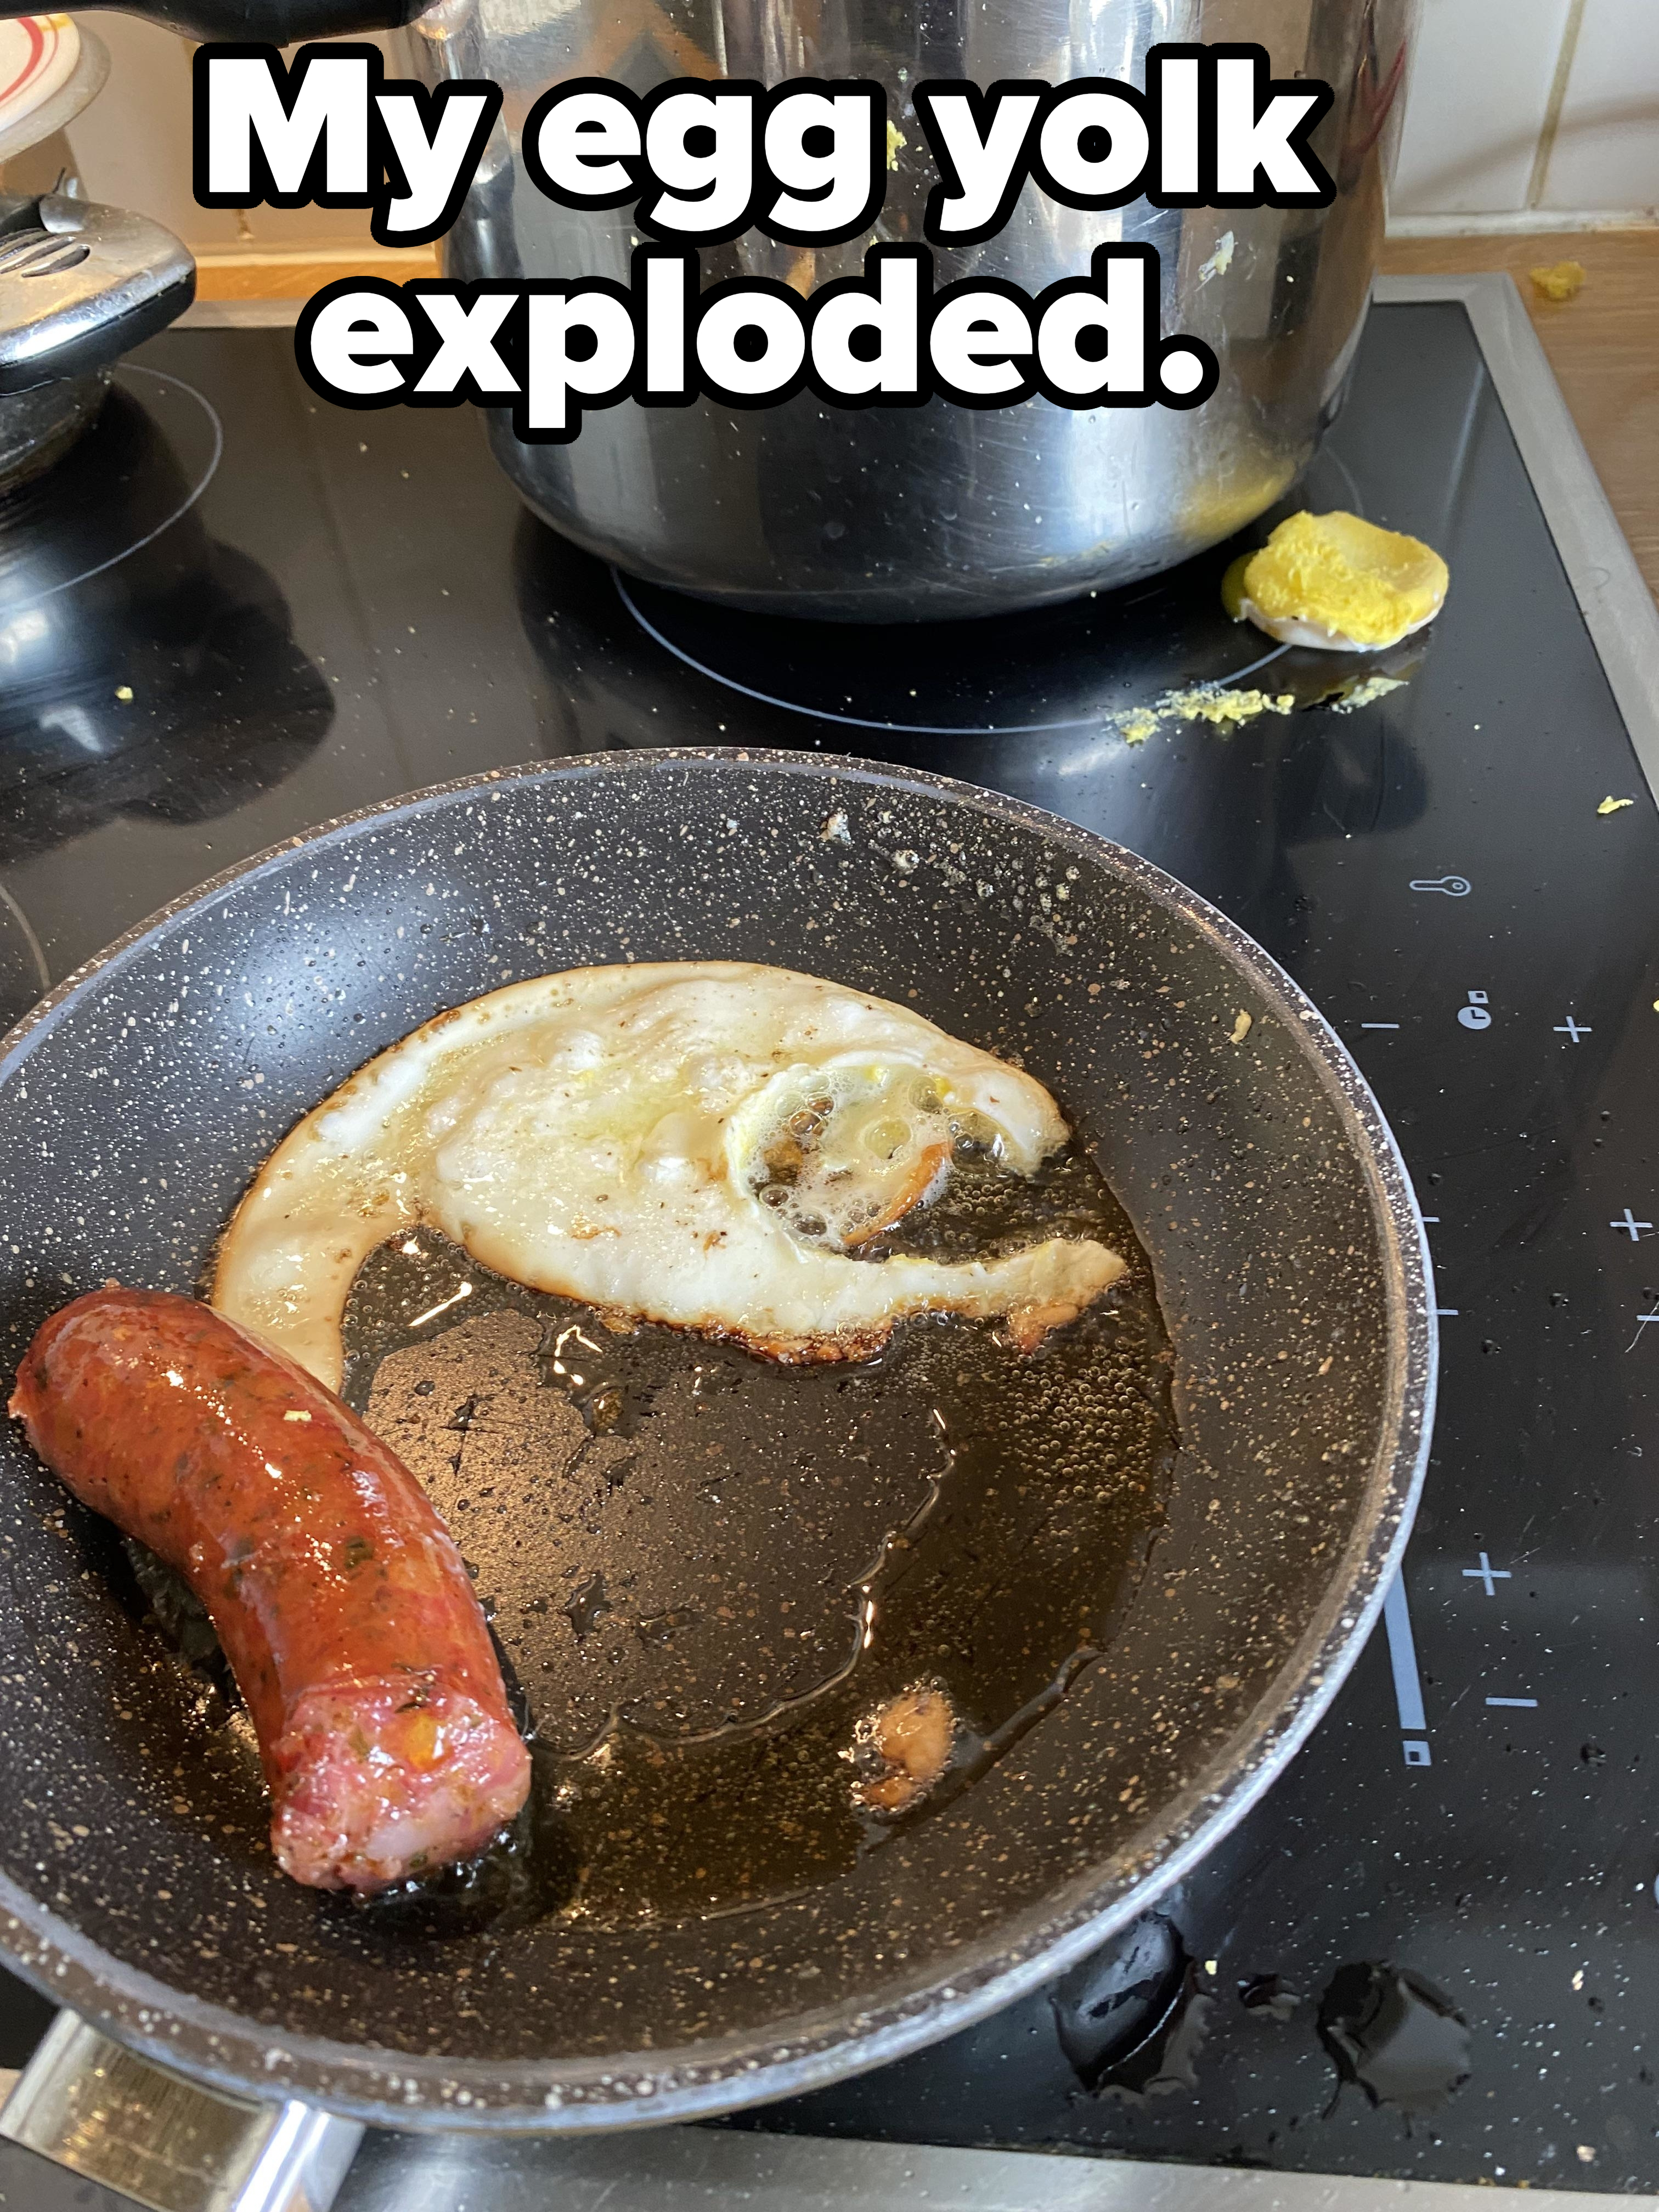 Frying pan on a stove containing one sausage and a partially cooked, misshapen fried egg missing the yolk, which is now on the stovetop, with caption &quot;My egg yolk exploded&quot;